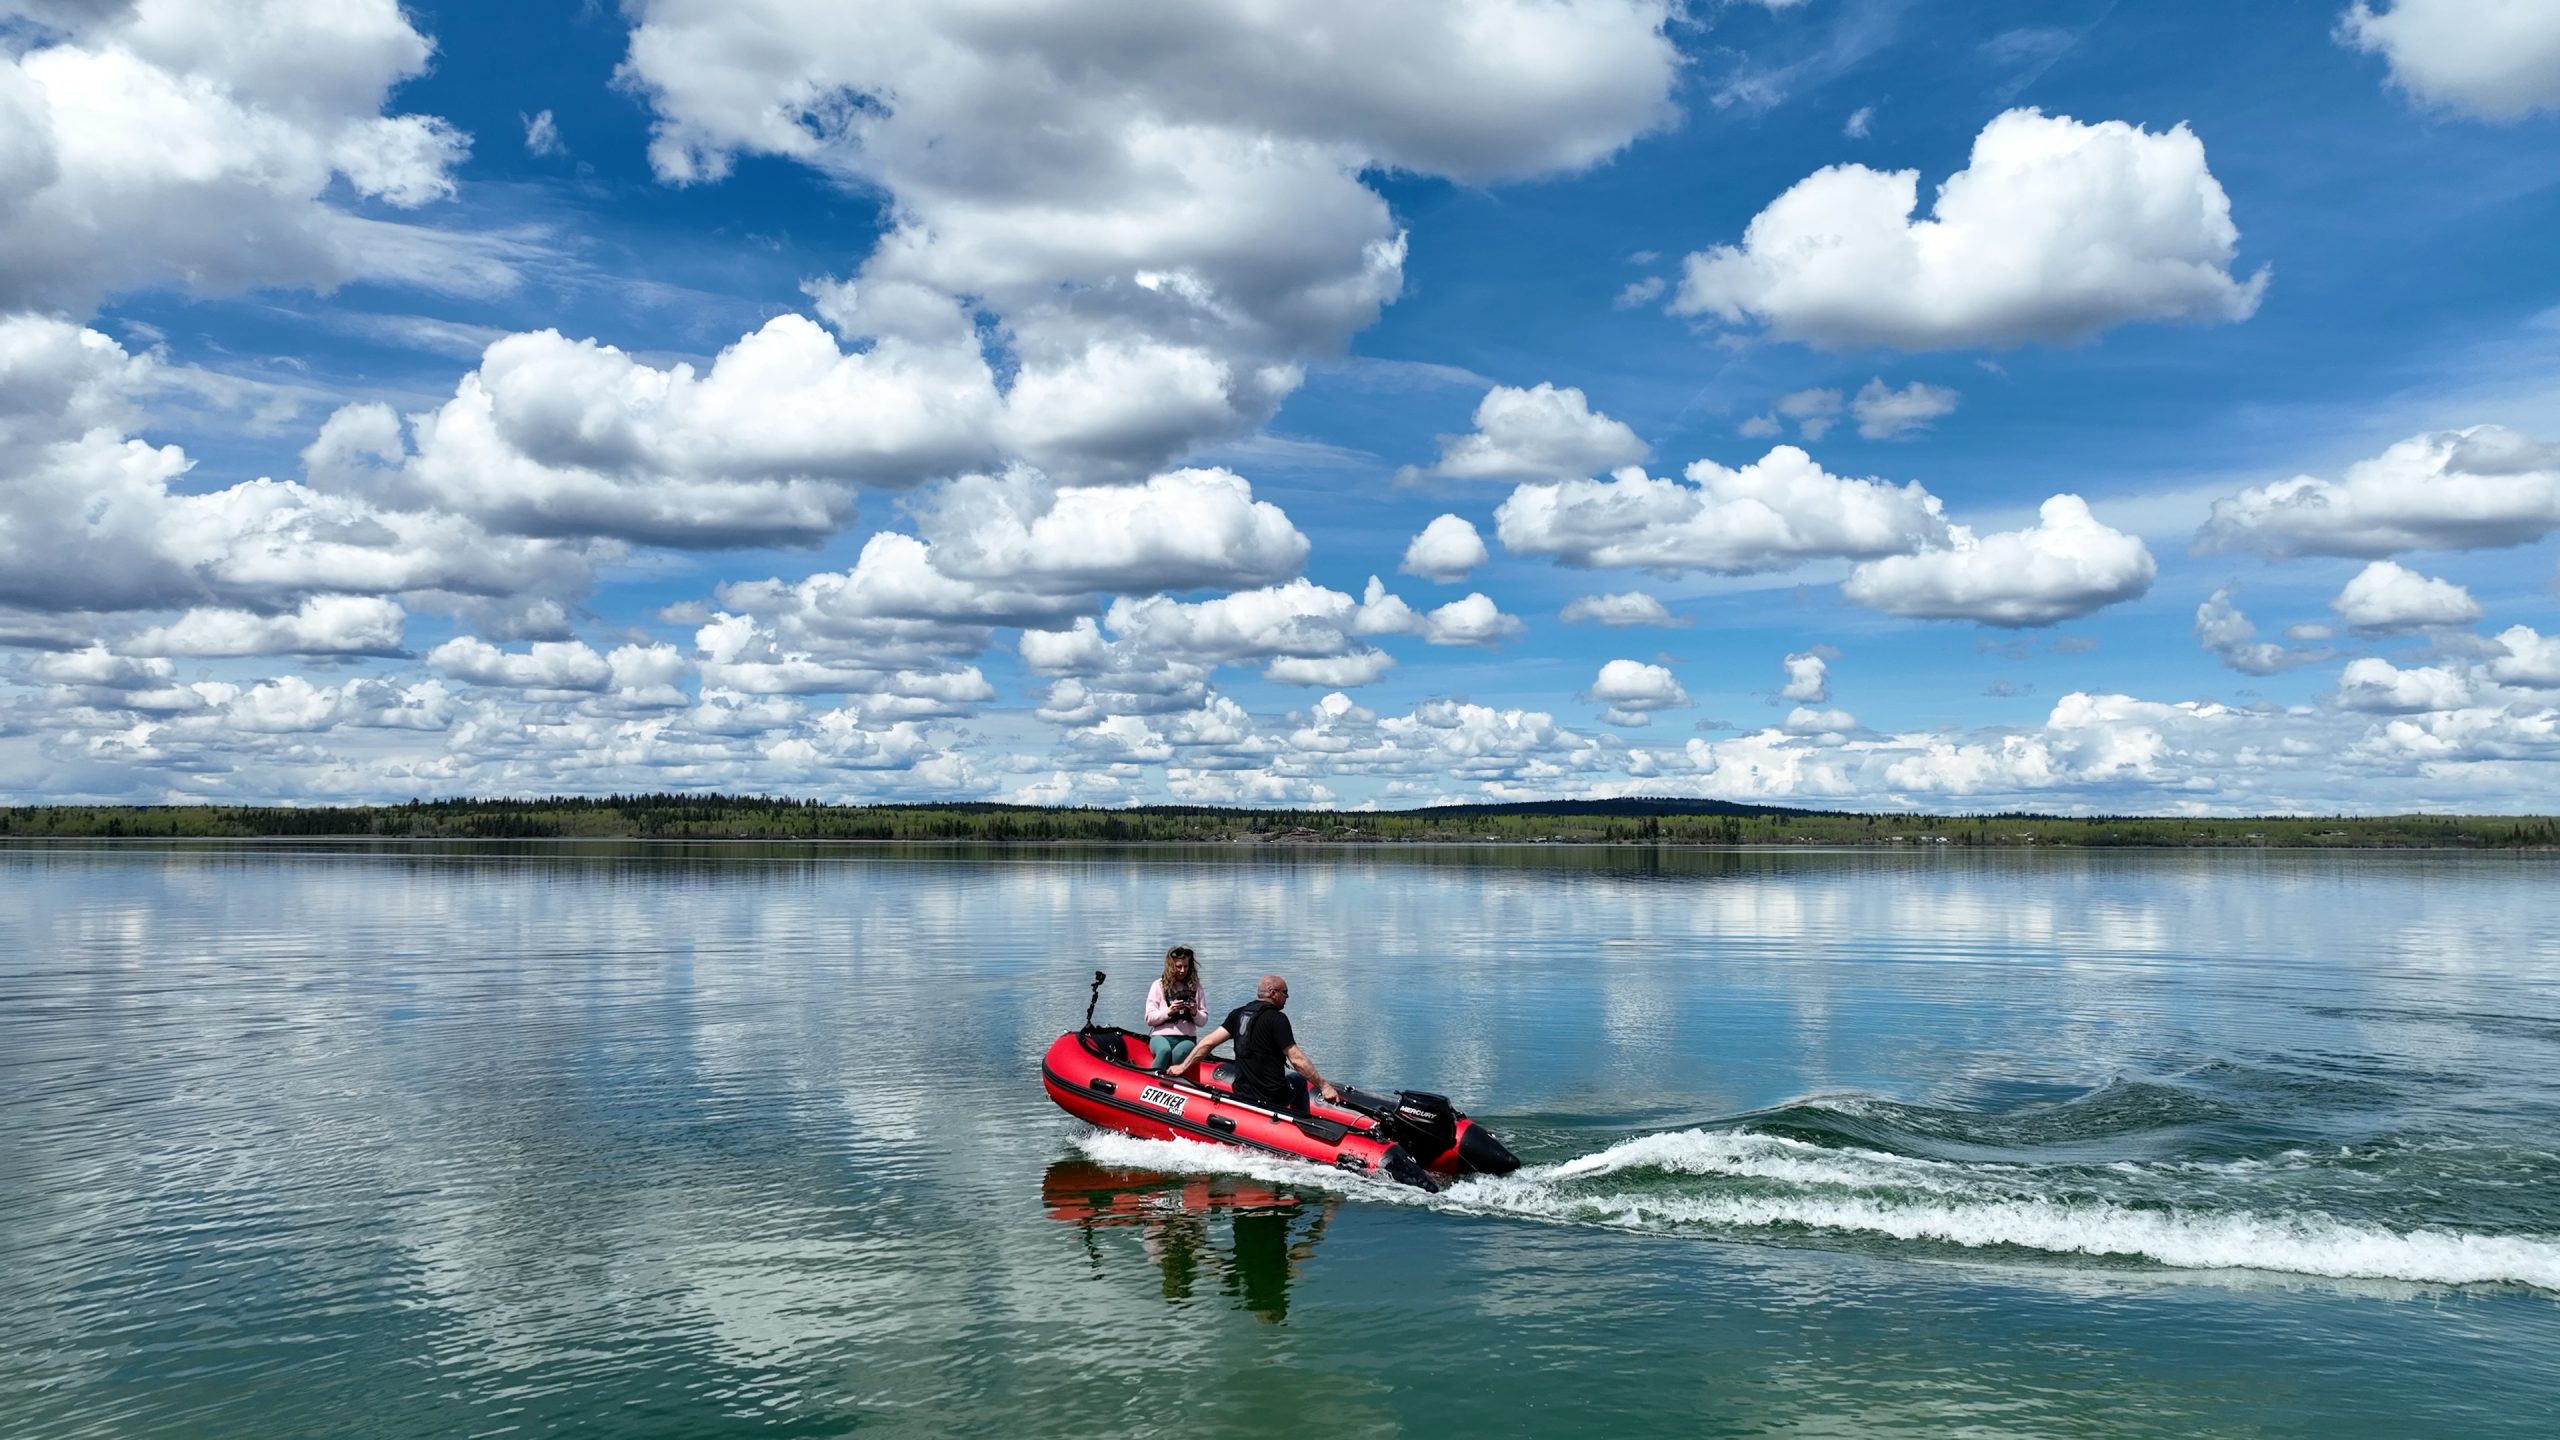 8 questions to ask yourself before buying an inflatable boat